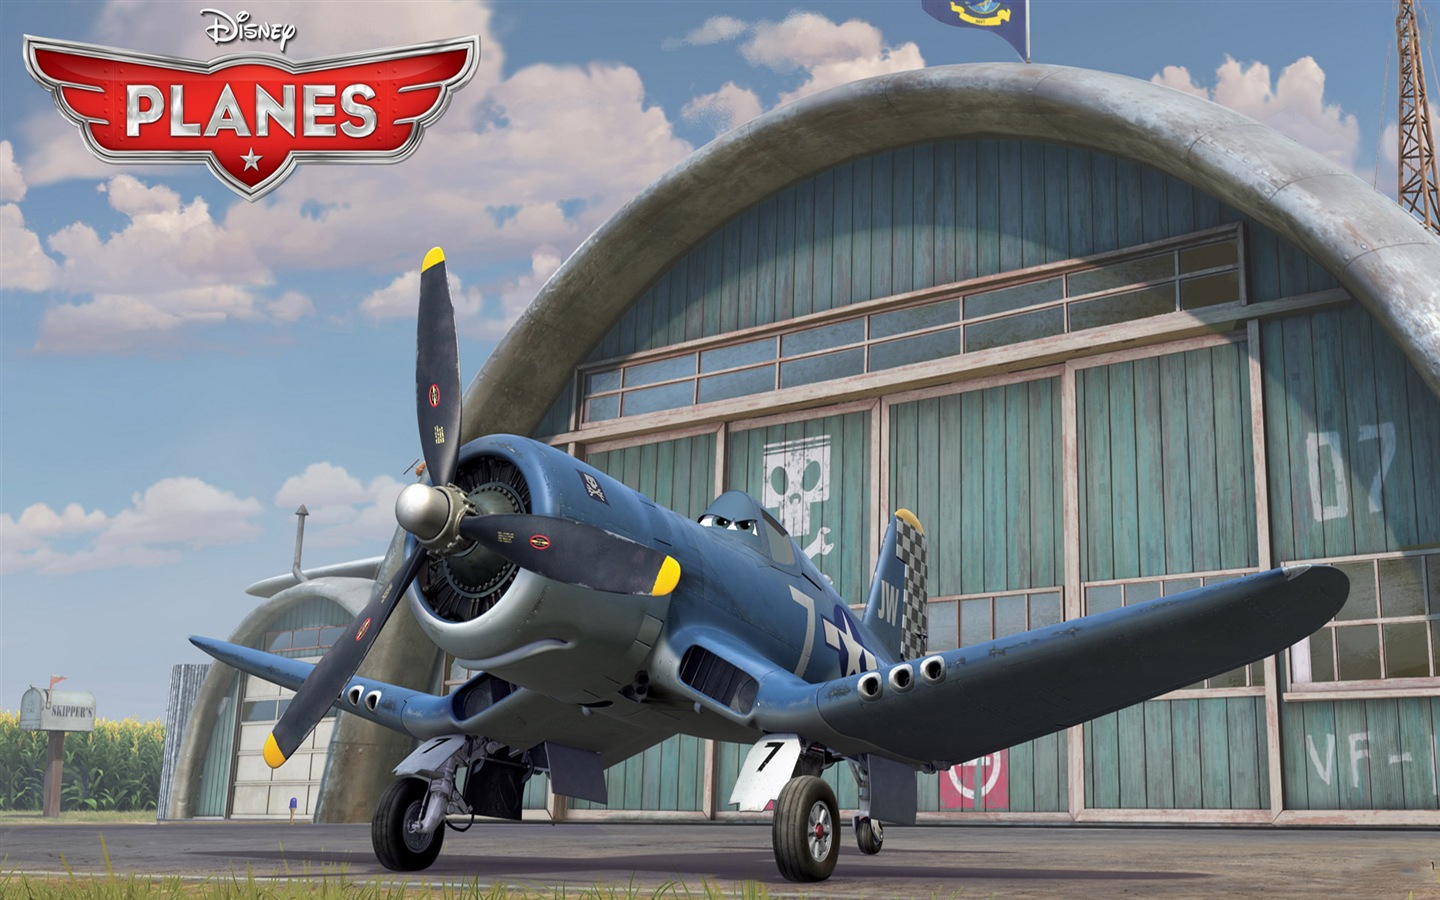 Planes 2013 HD wallpapers #13 - 1440x900